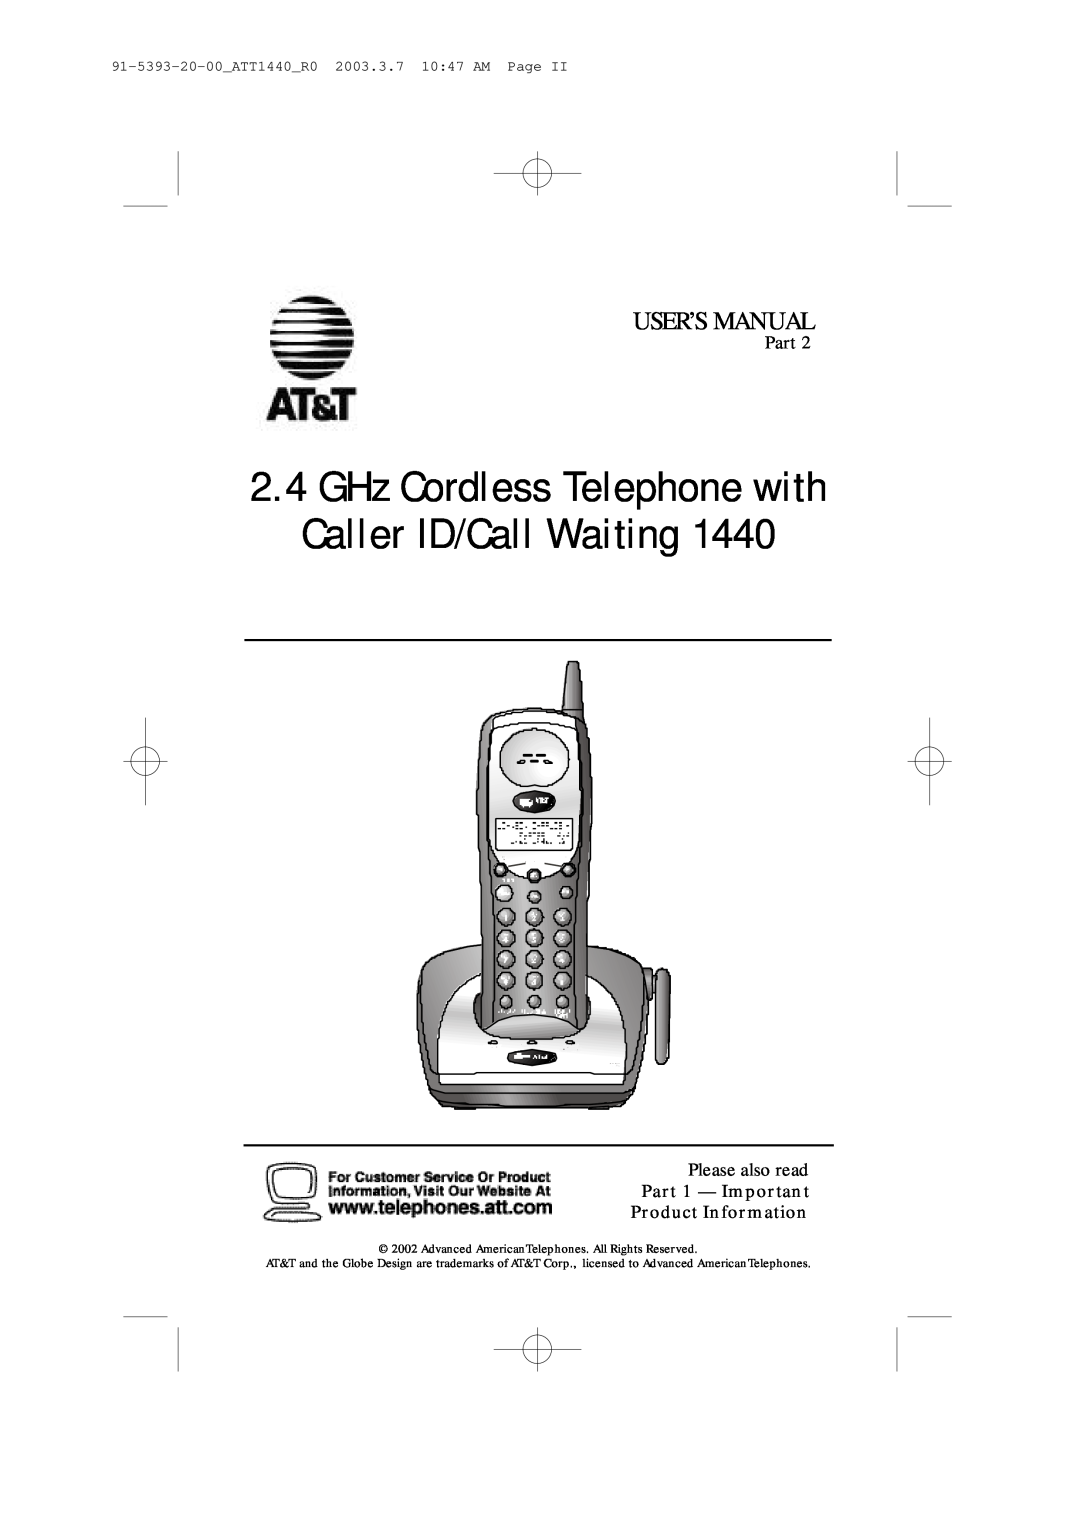 AT&T 1440 user manual Part 1 - Important Product Information, GHz Cordless Telephone with Caller ID/Call Waiting 